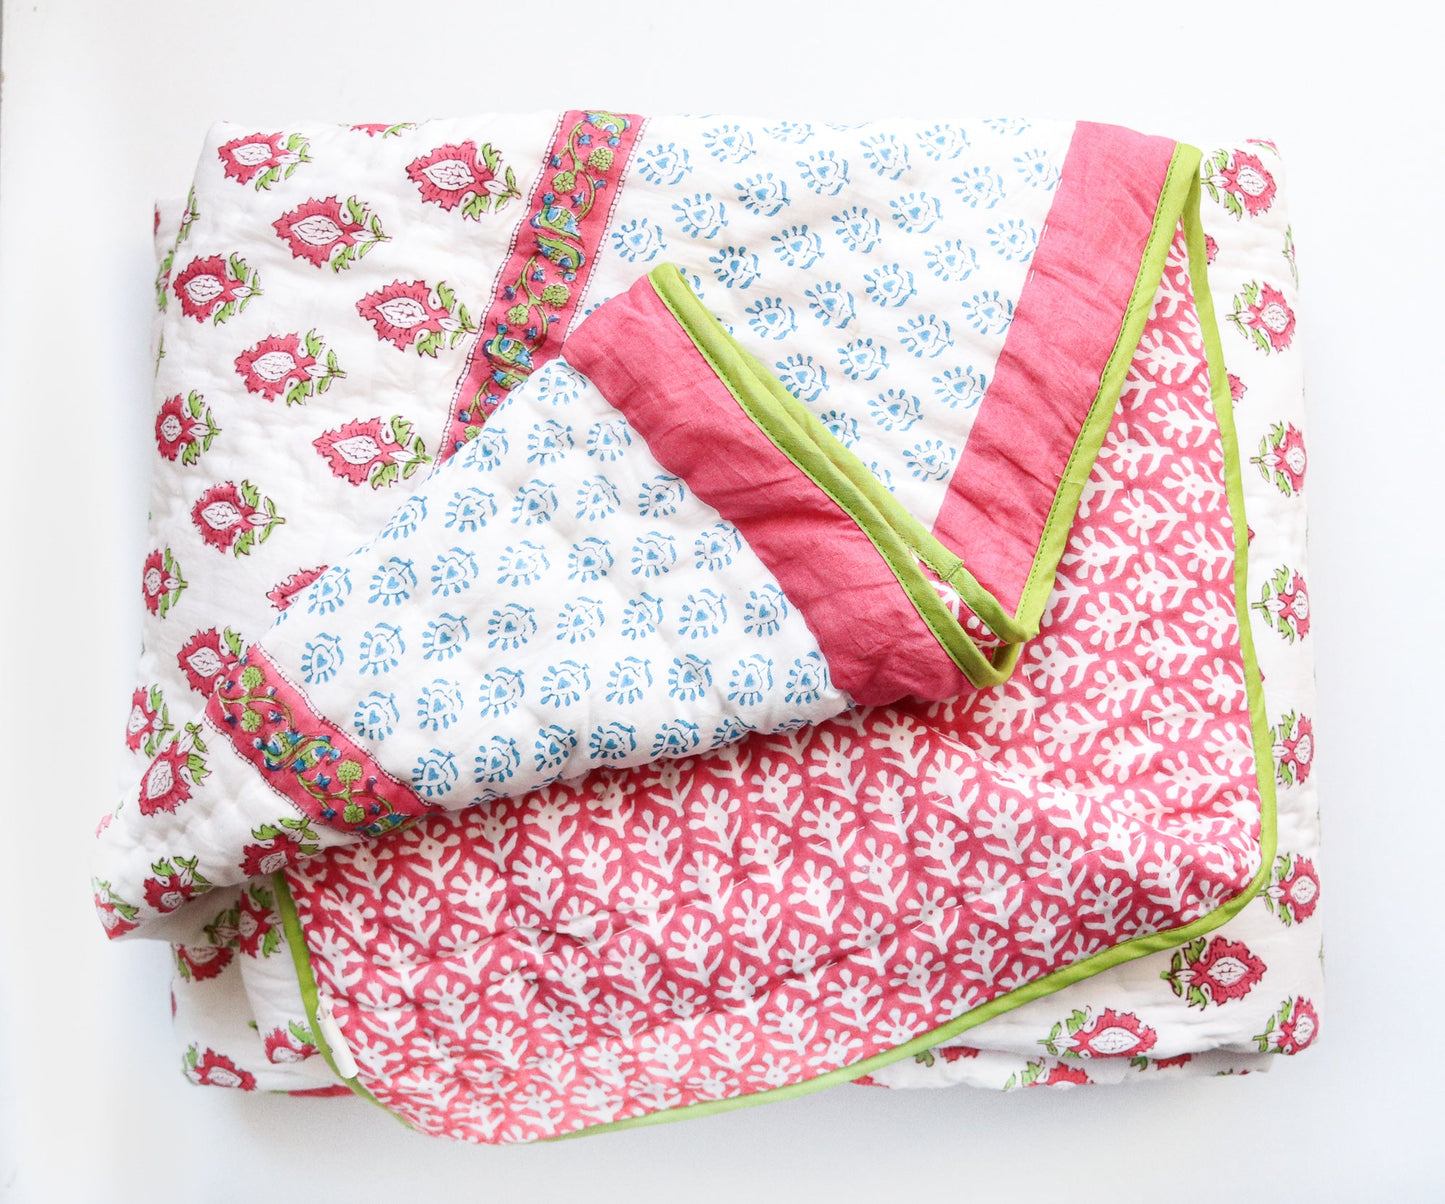 Boho Pink quilt - Baby size - 36x48 inches